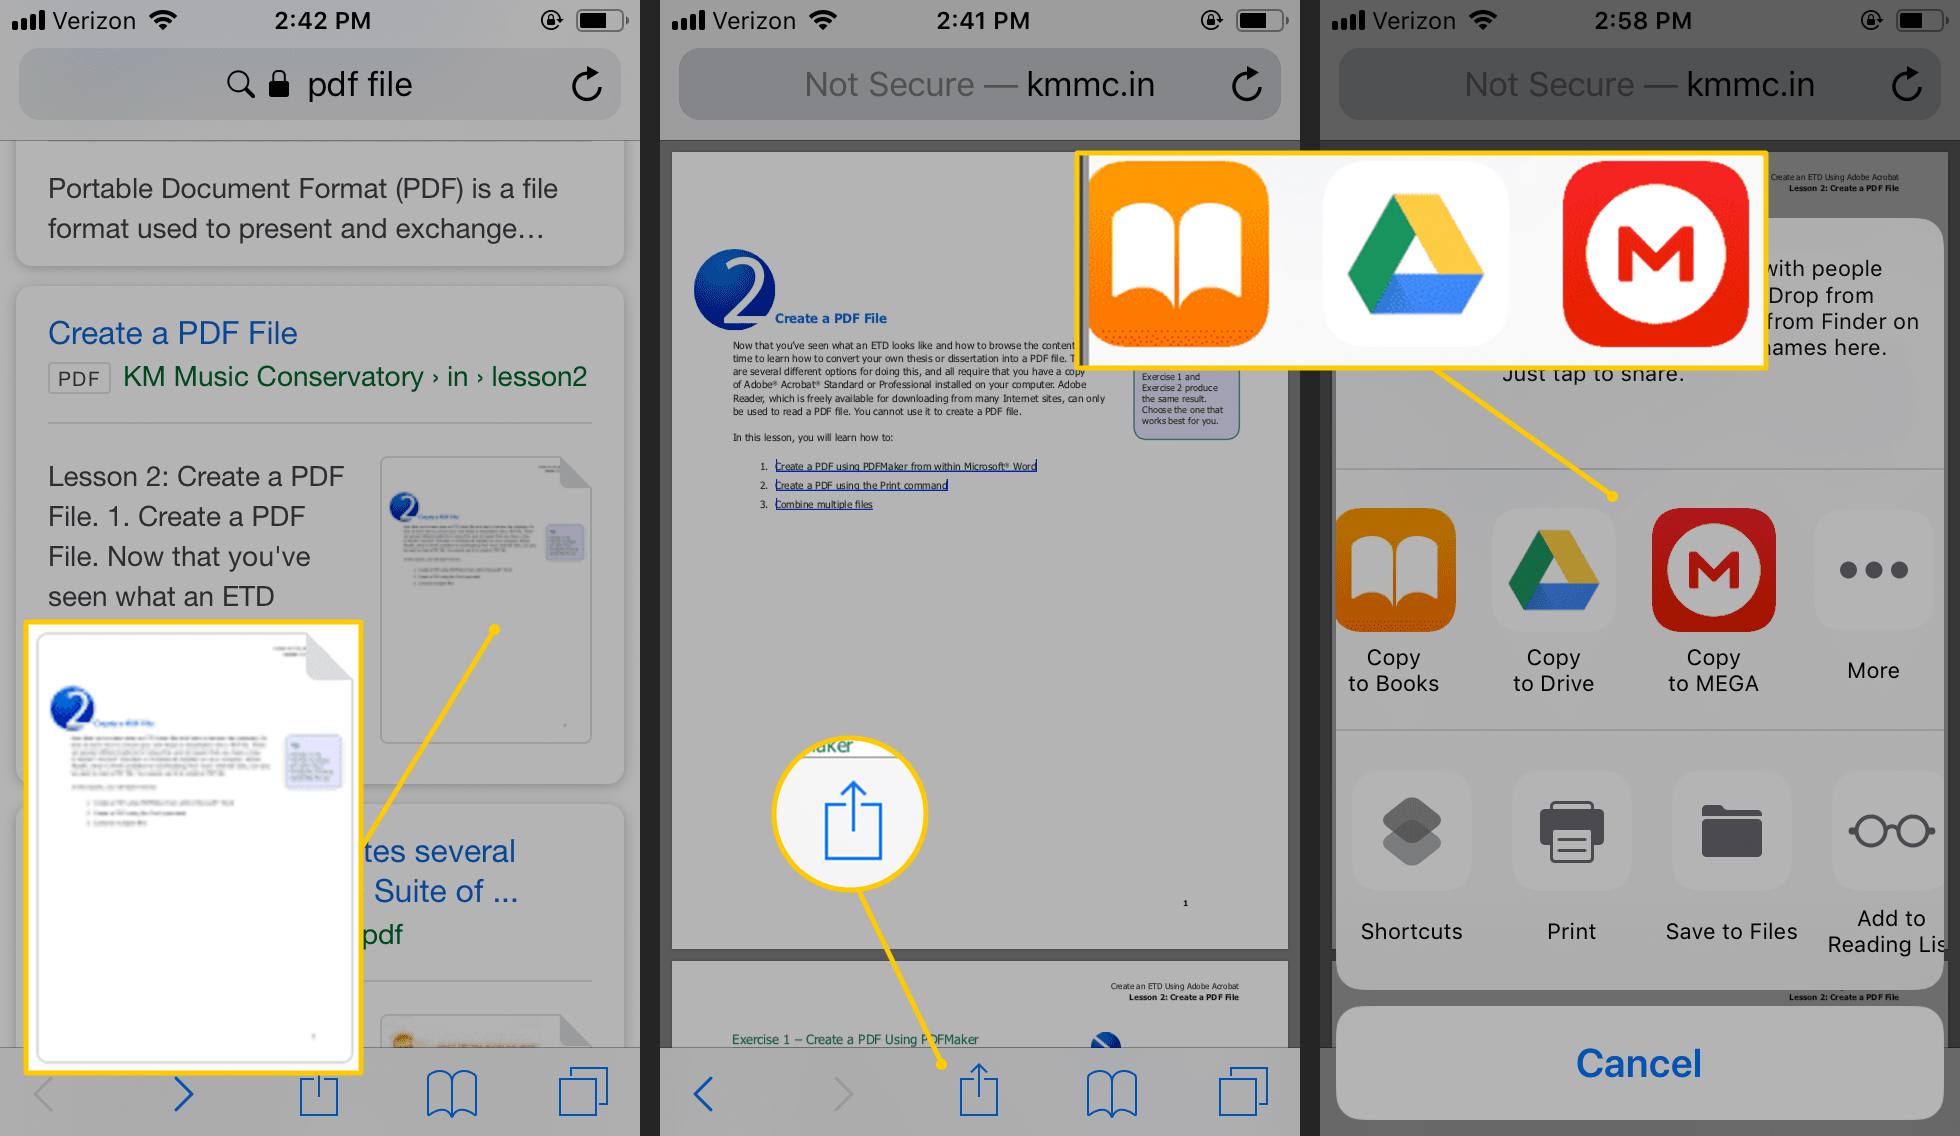 How to Save a PDF to Your iPhone or iPad.